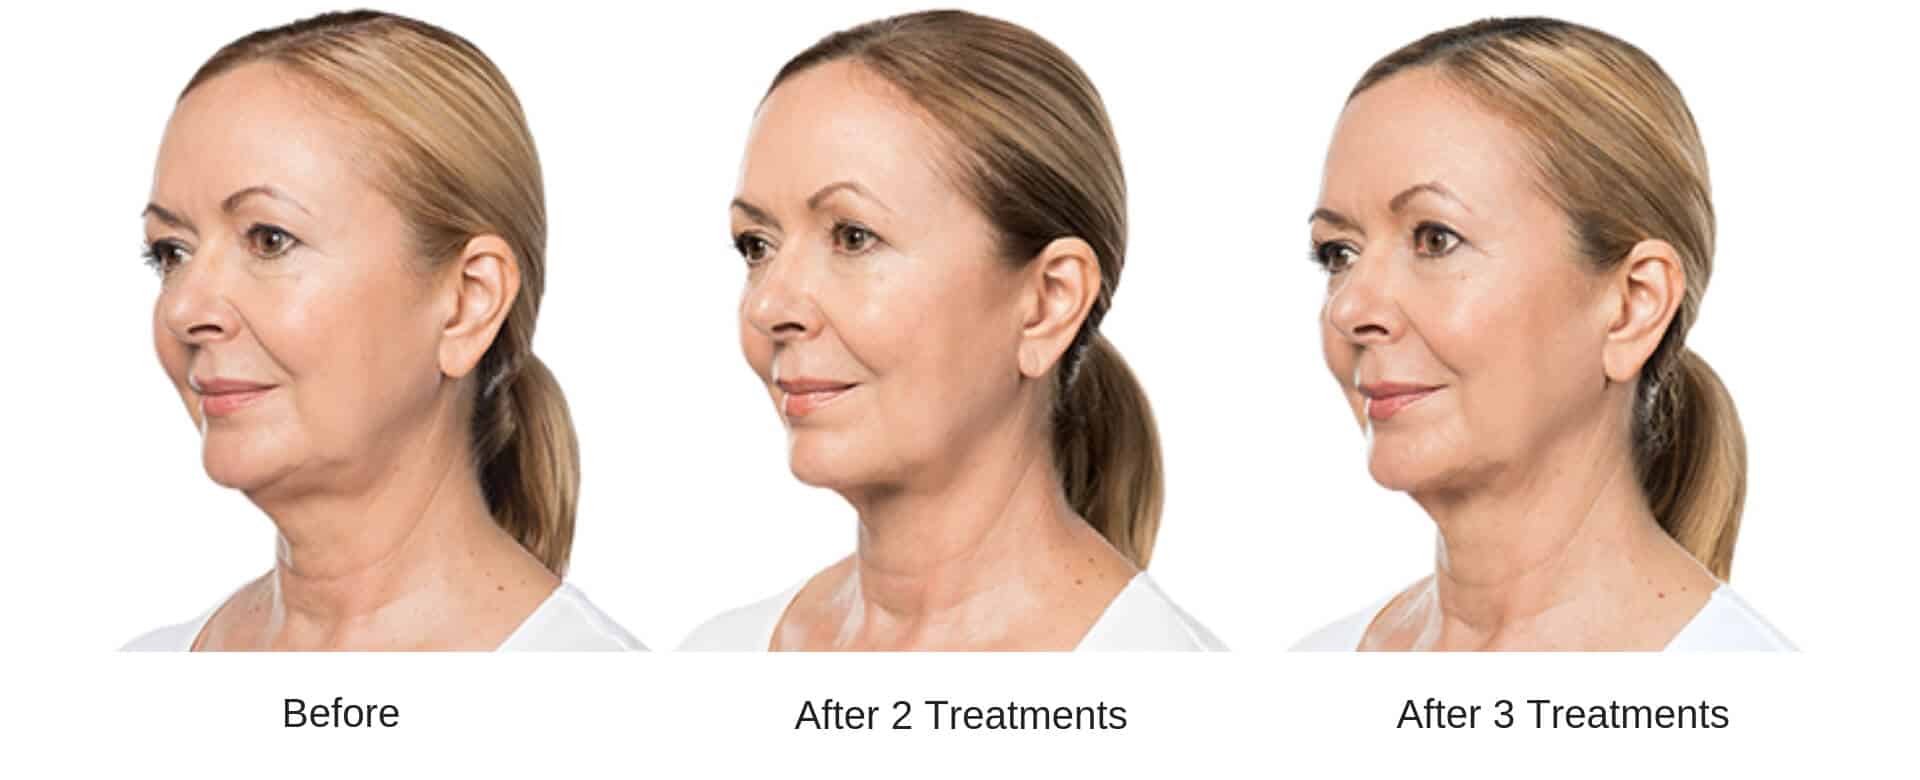 Angle of face after kybella injections